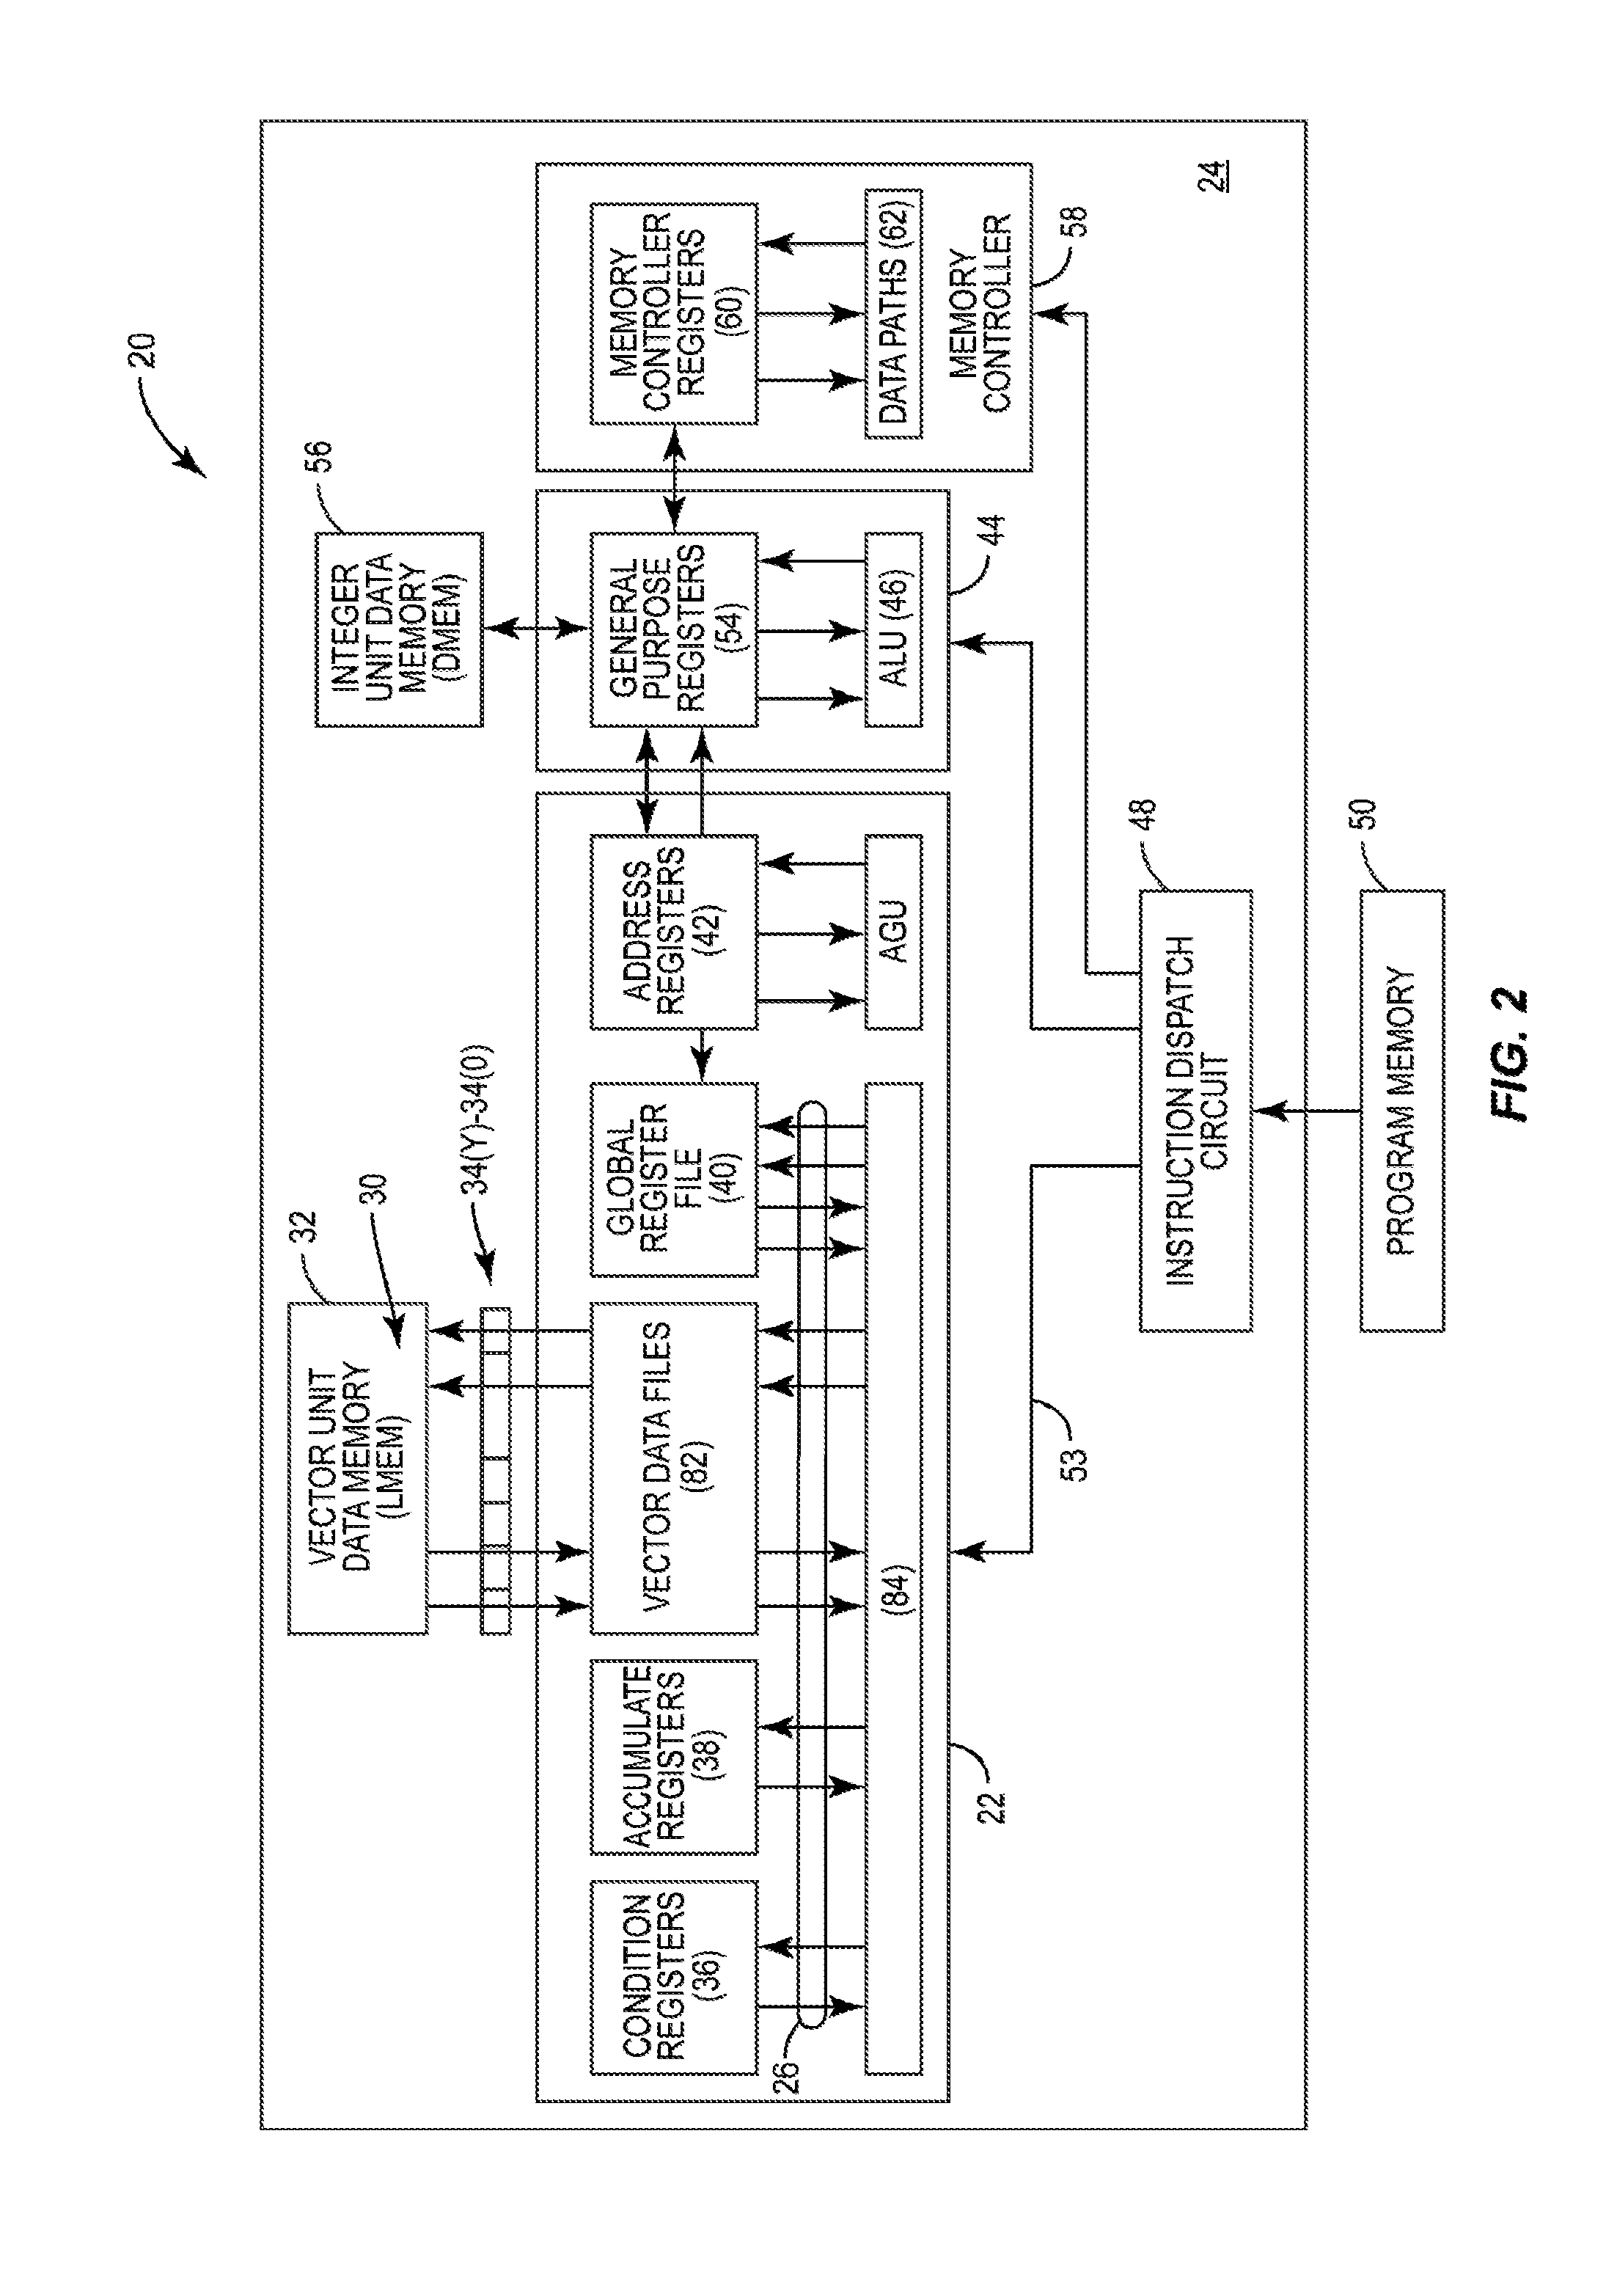 VECTOR PROCESSING ENGINES (VPEs) EMPLOYING A TAPPED-DELAY LINE(S) FOR PROVIDING PRECISION FILTER VECTOR PROCESSING OPERATIONS WITH REDUCED SAMPLE RE-FETCHING AND POWER CONSUMPTION, AND RELATED VECTOR PROCESSOR SYSTEMS AND METHODS